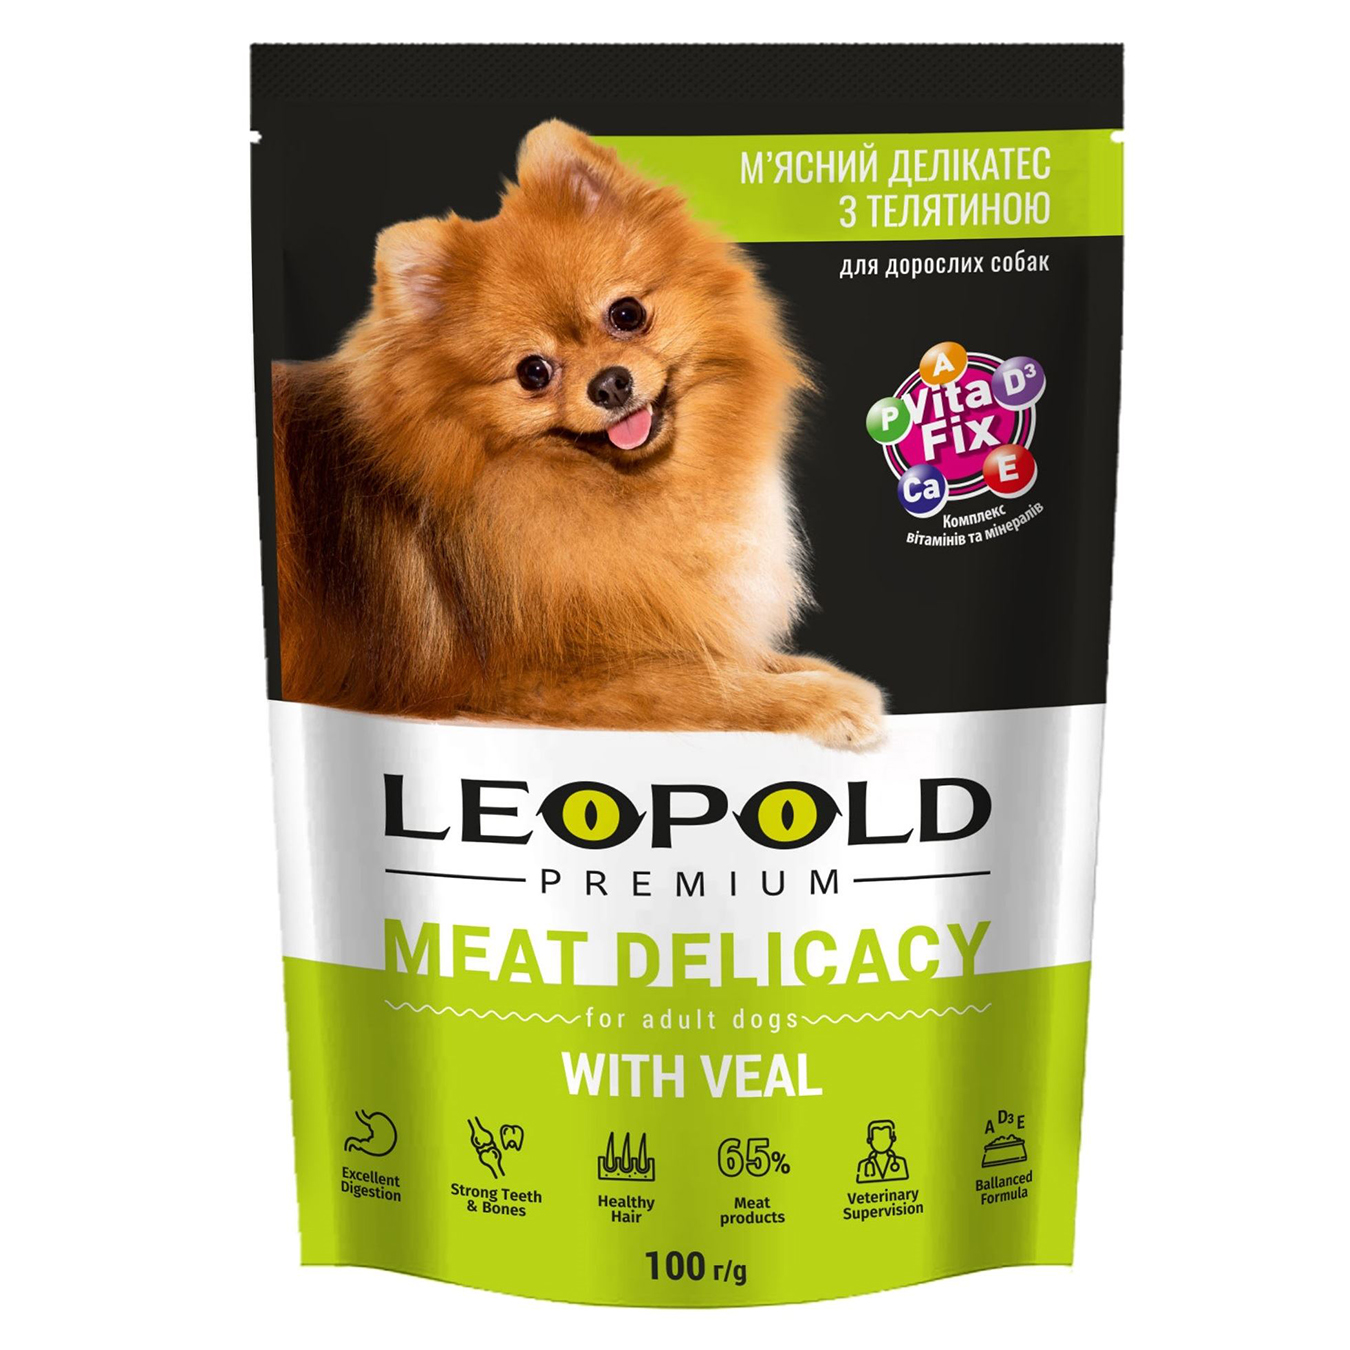 Leopold wet dog food with veal 100g